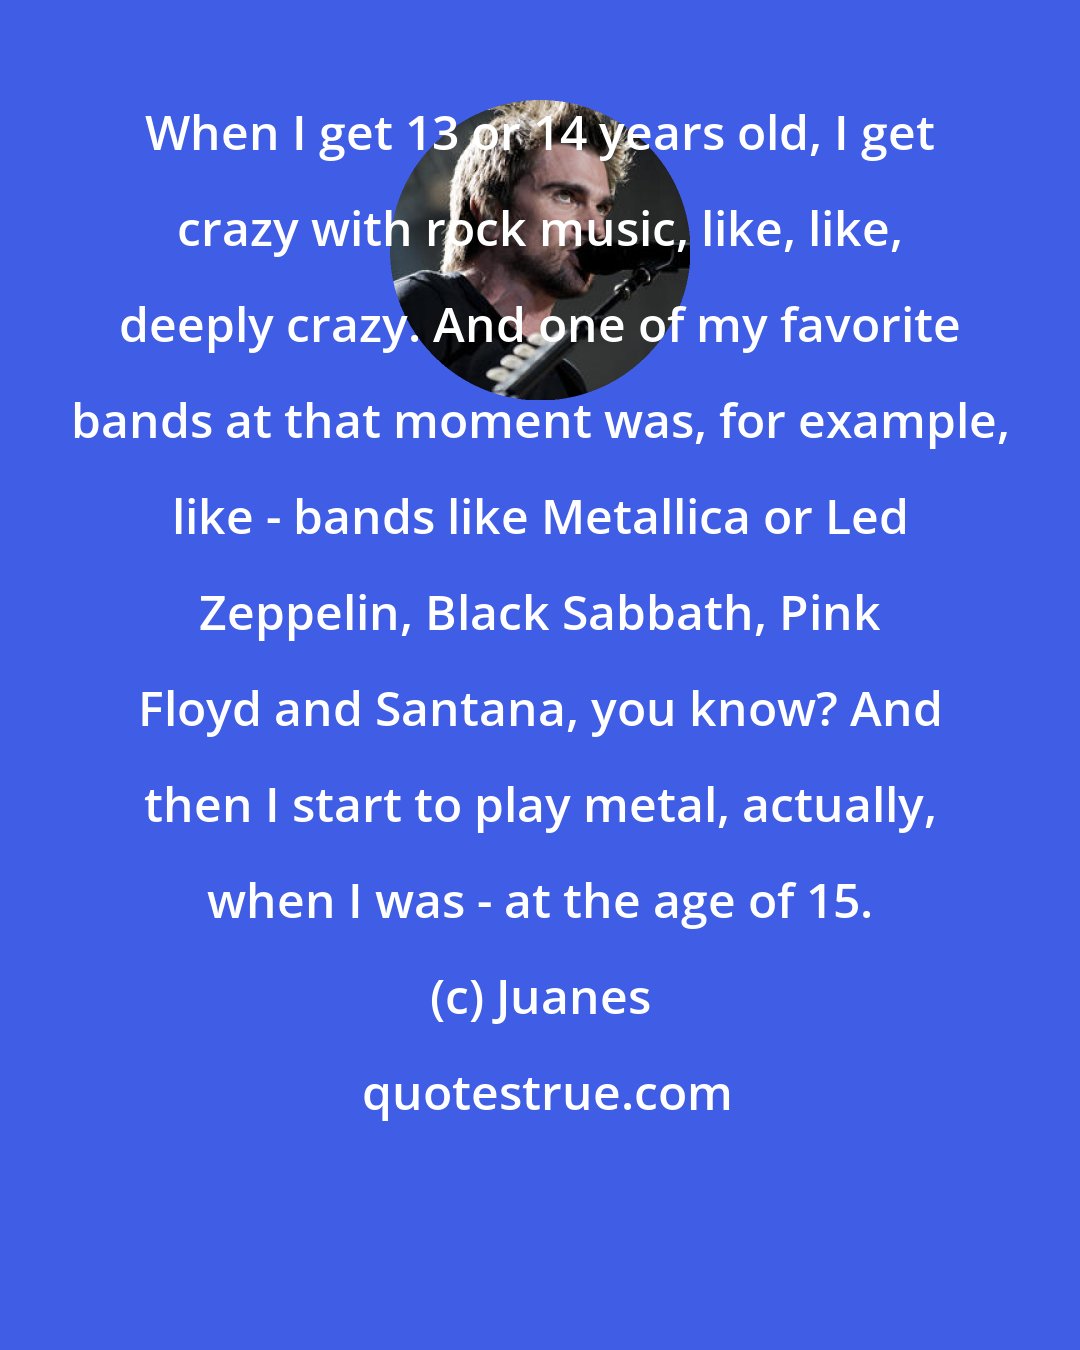 Juanes: When I get 13 or 14 years old, I get crazy with rock music, like, like, deeply crazy. And one of my favorite bands at that moment was, for example, like - bands like Metallica or Led Zeppelin, Black Sabbath, Pink Floyd and Santana, you know? And then I start to play metal, actually, when I was - at the age of 15.